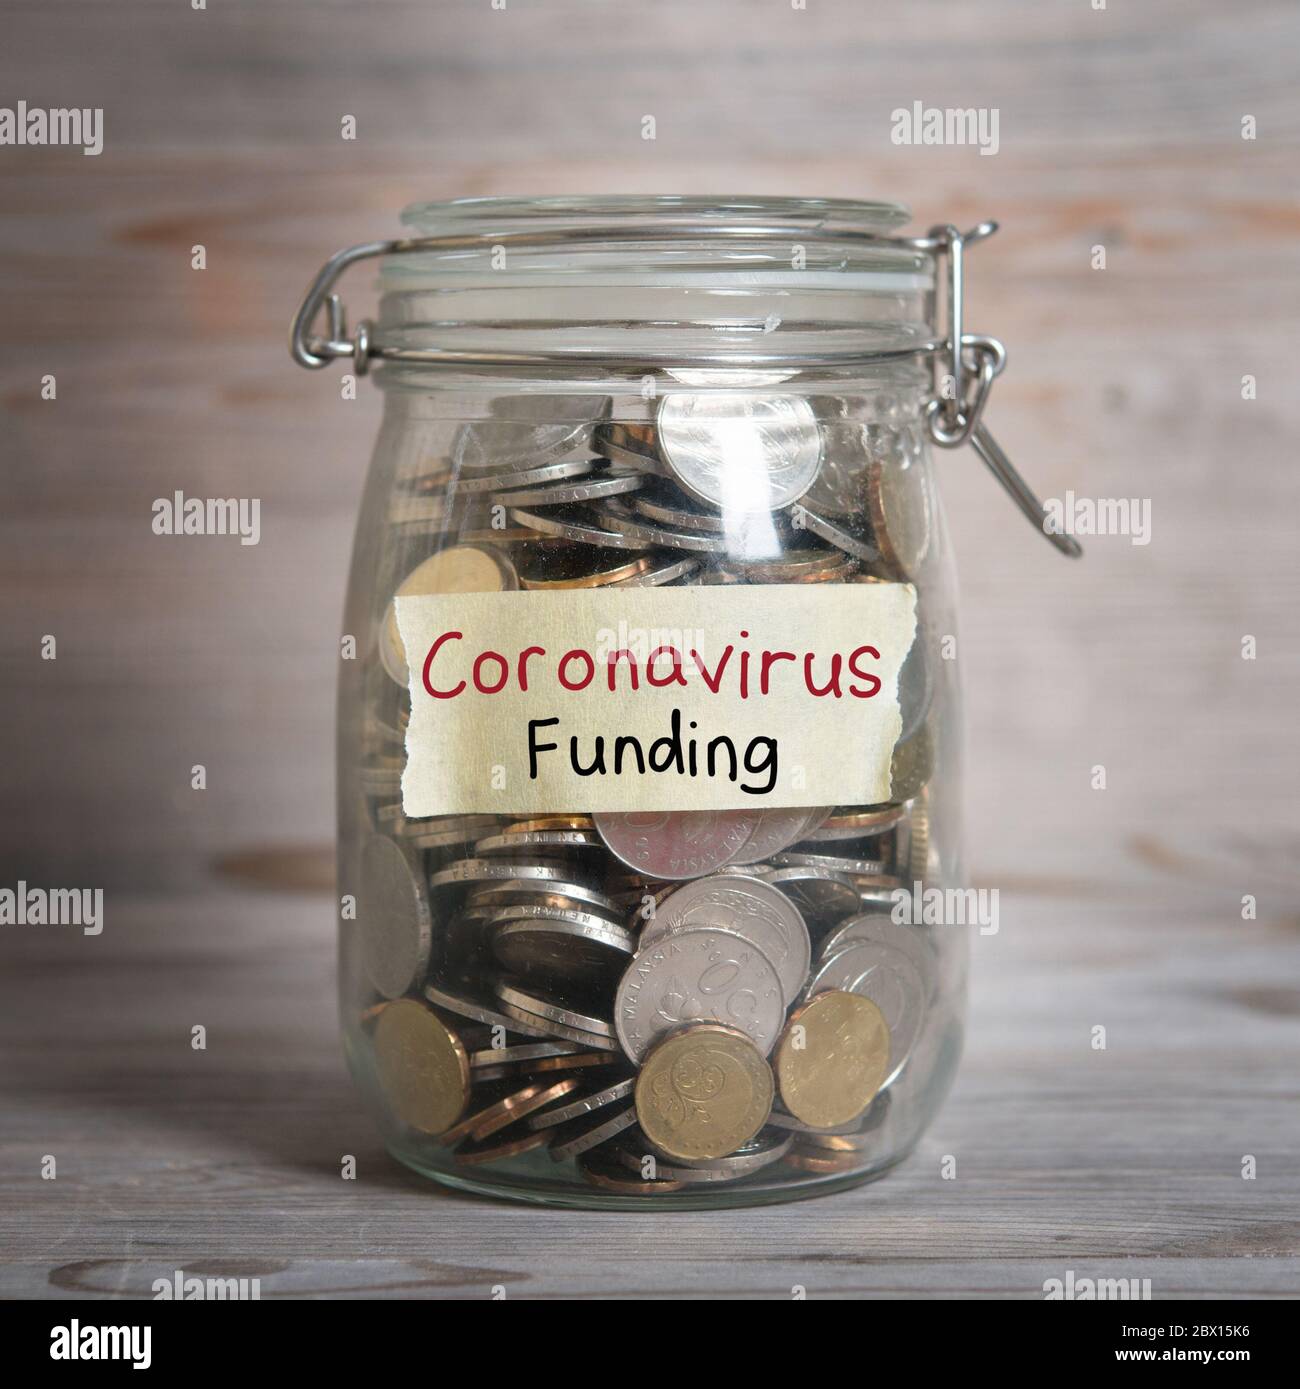 Coins in glass money jar with Coronavirus Funding label, financial concept. Vintage wooden background with dramatic light. Stock Photo